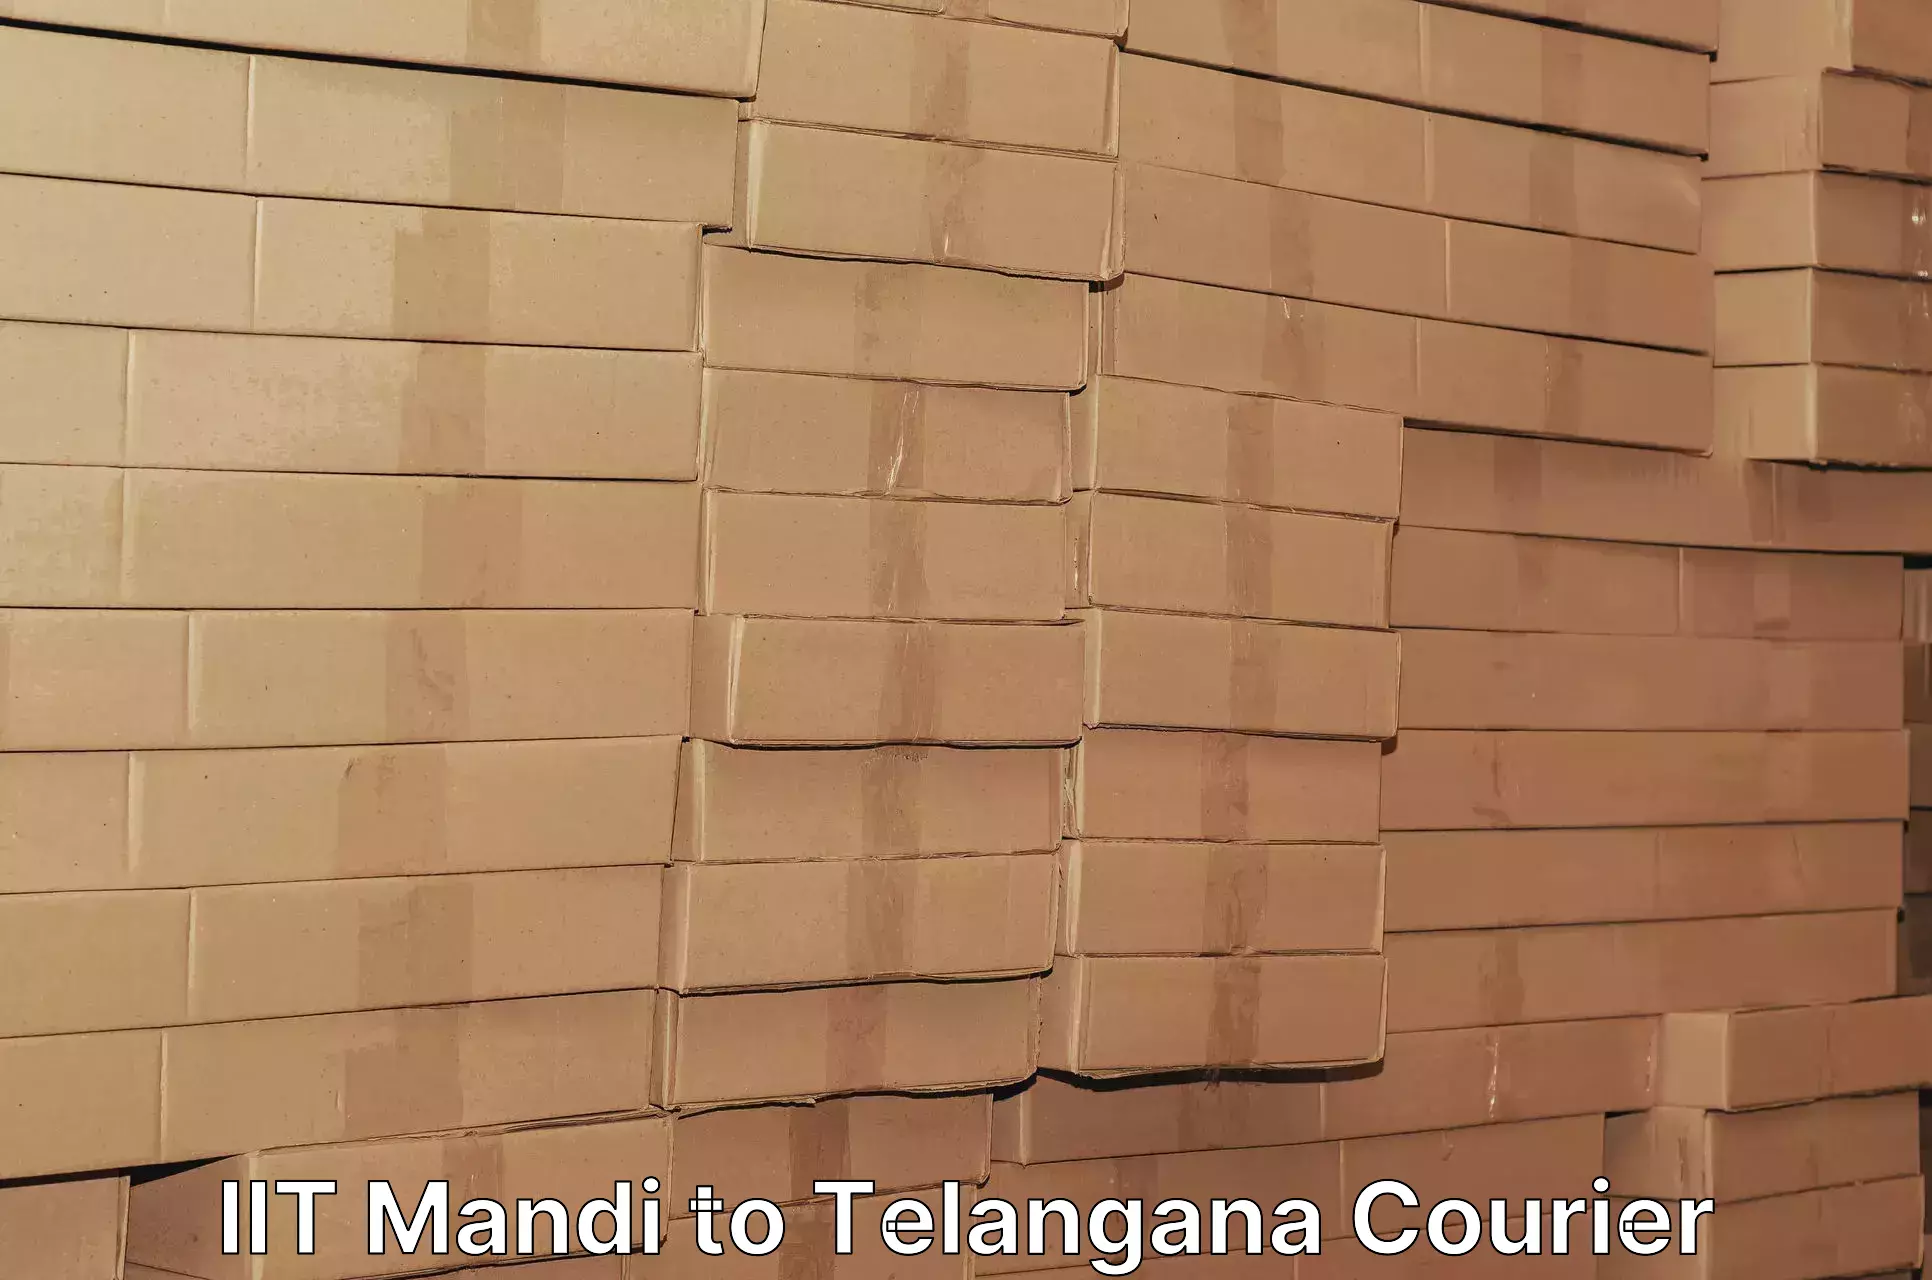 Subscription-based courier IIT Mandi to Banswada